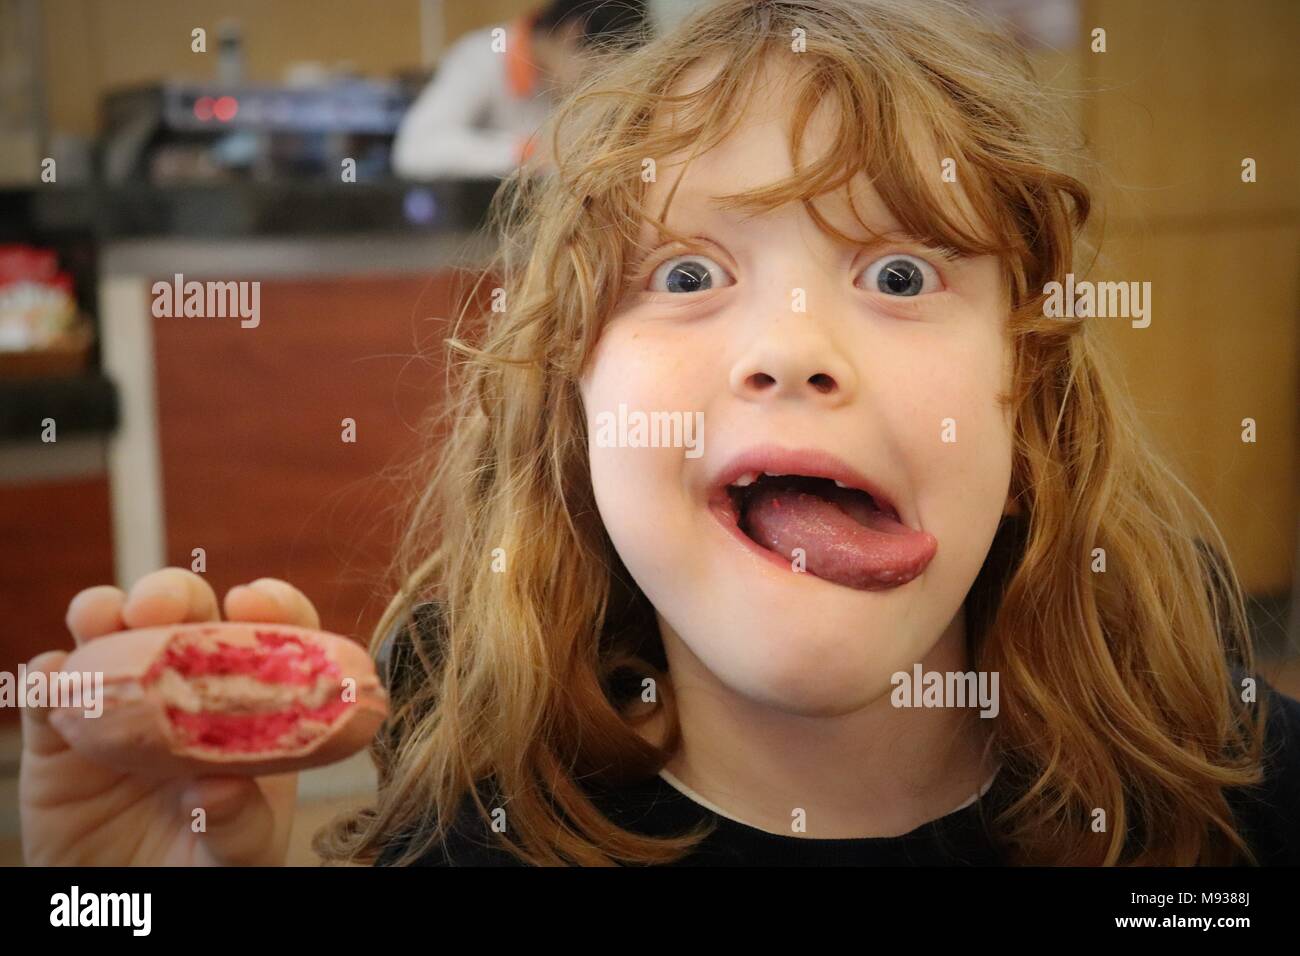 A Girl with Curly Ginger Hair and Blue Eyes Sticks her Tongue Out as she eats an over - sized Pink Macaron Stock Photo